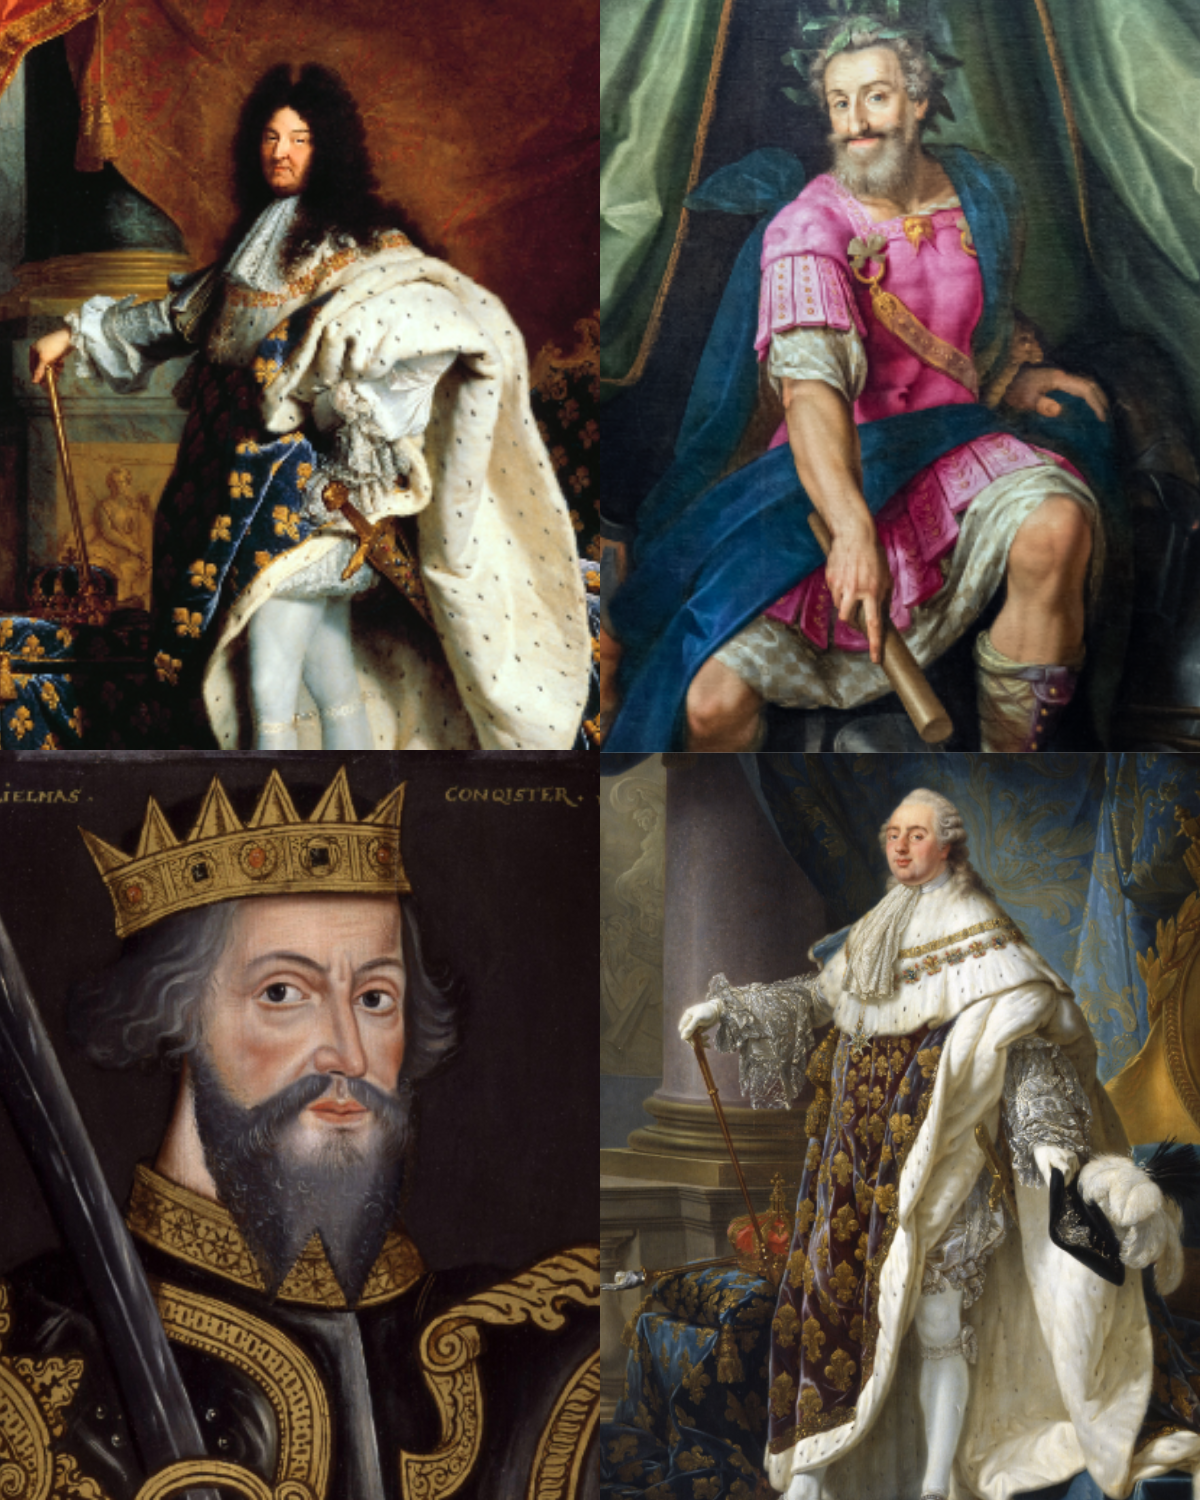 Louis IX, King Of France: What Did He Do & What Is His Legacy?